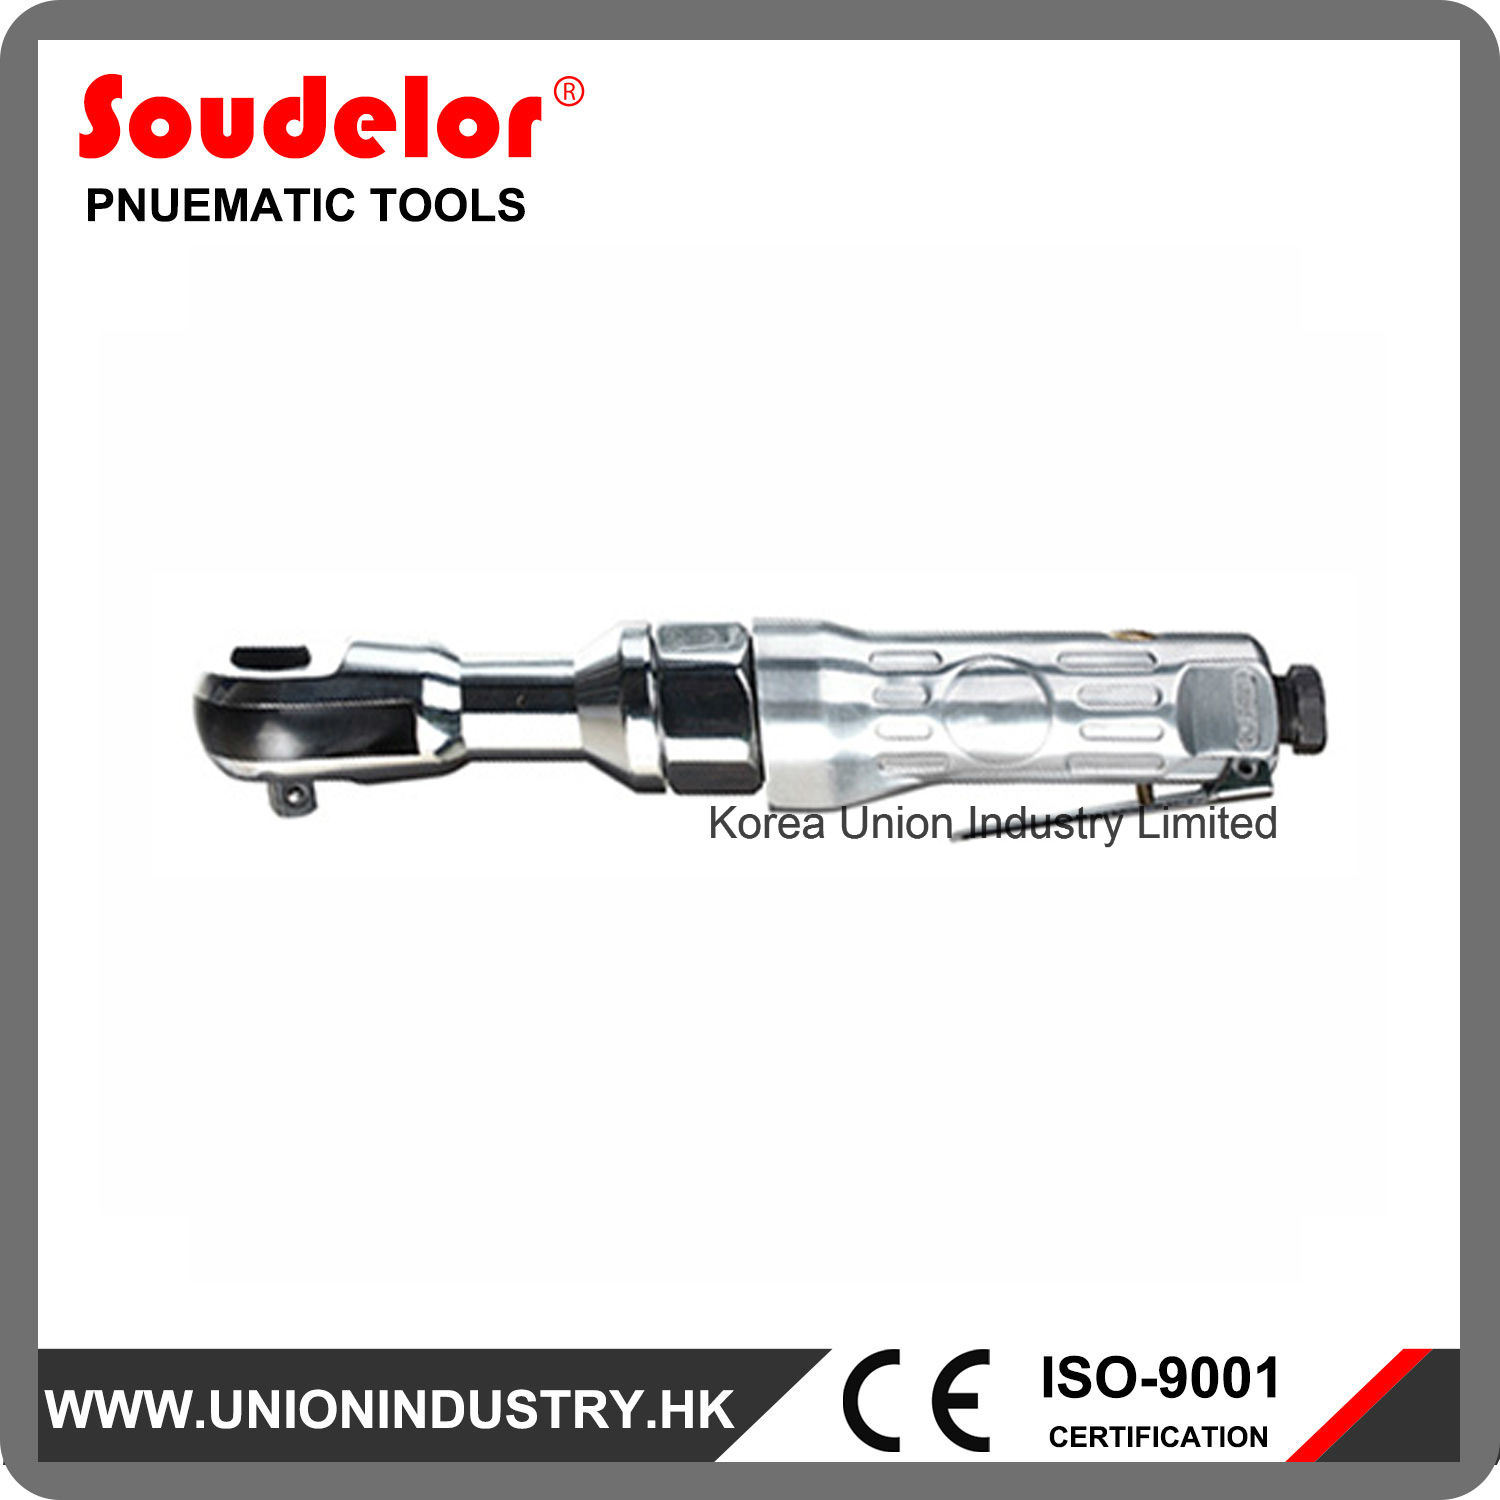 Power Air Impact Ratchet Wrench 1/2